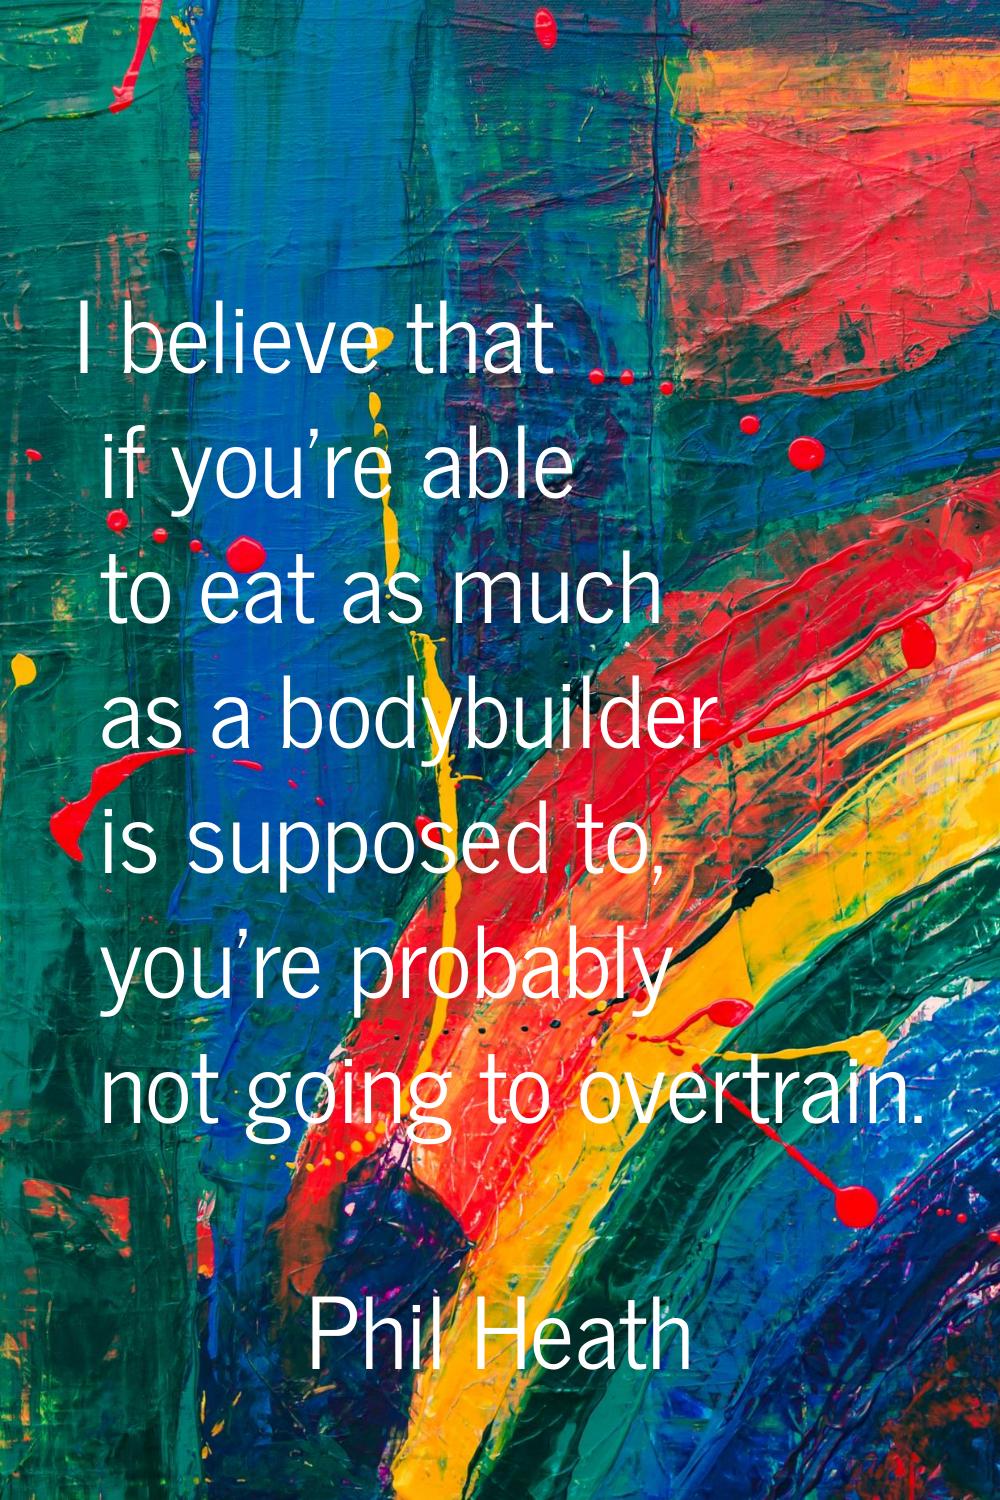 I believe that if you're able to eat as much as a bodybuilder is supposed to, you're probably not g